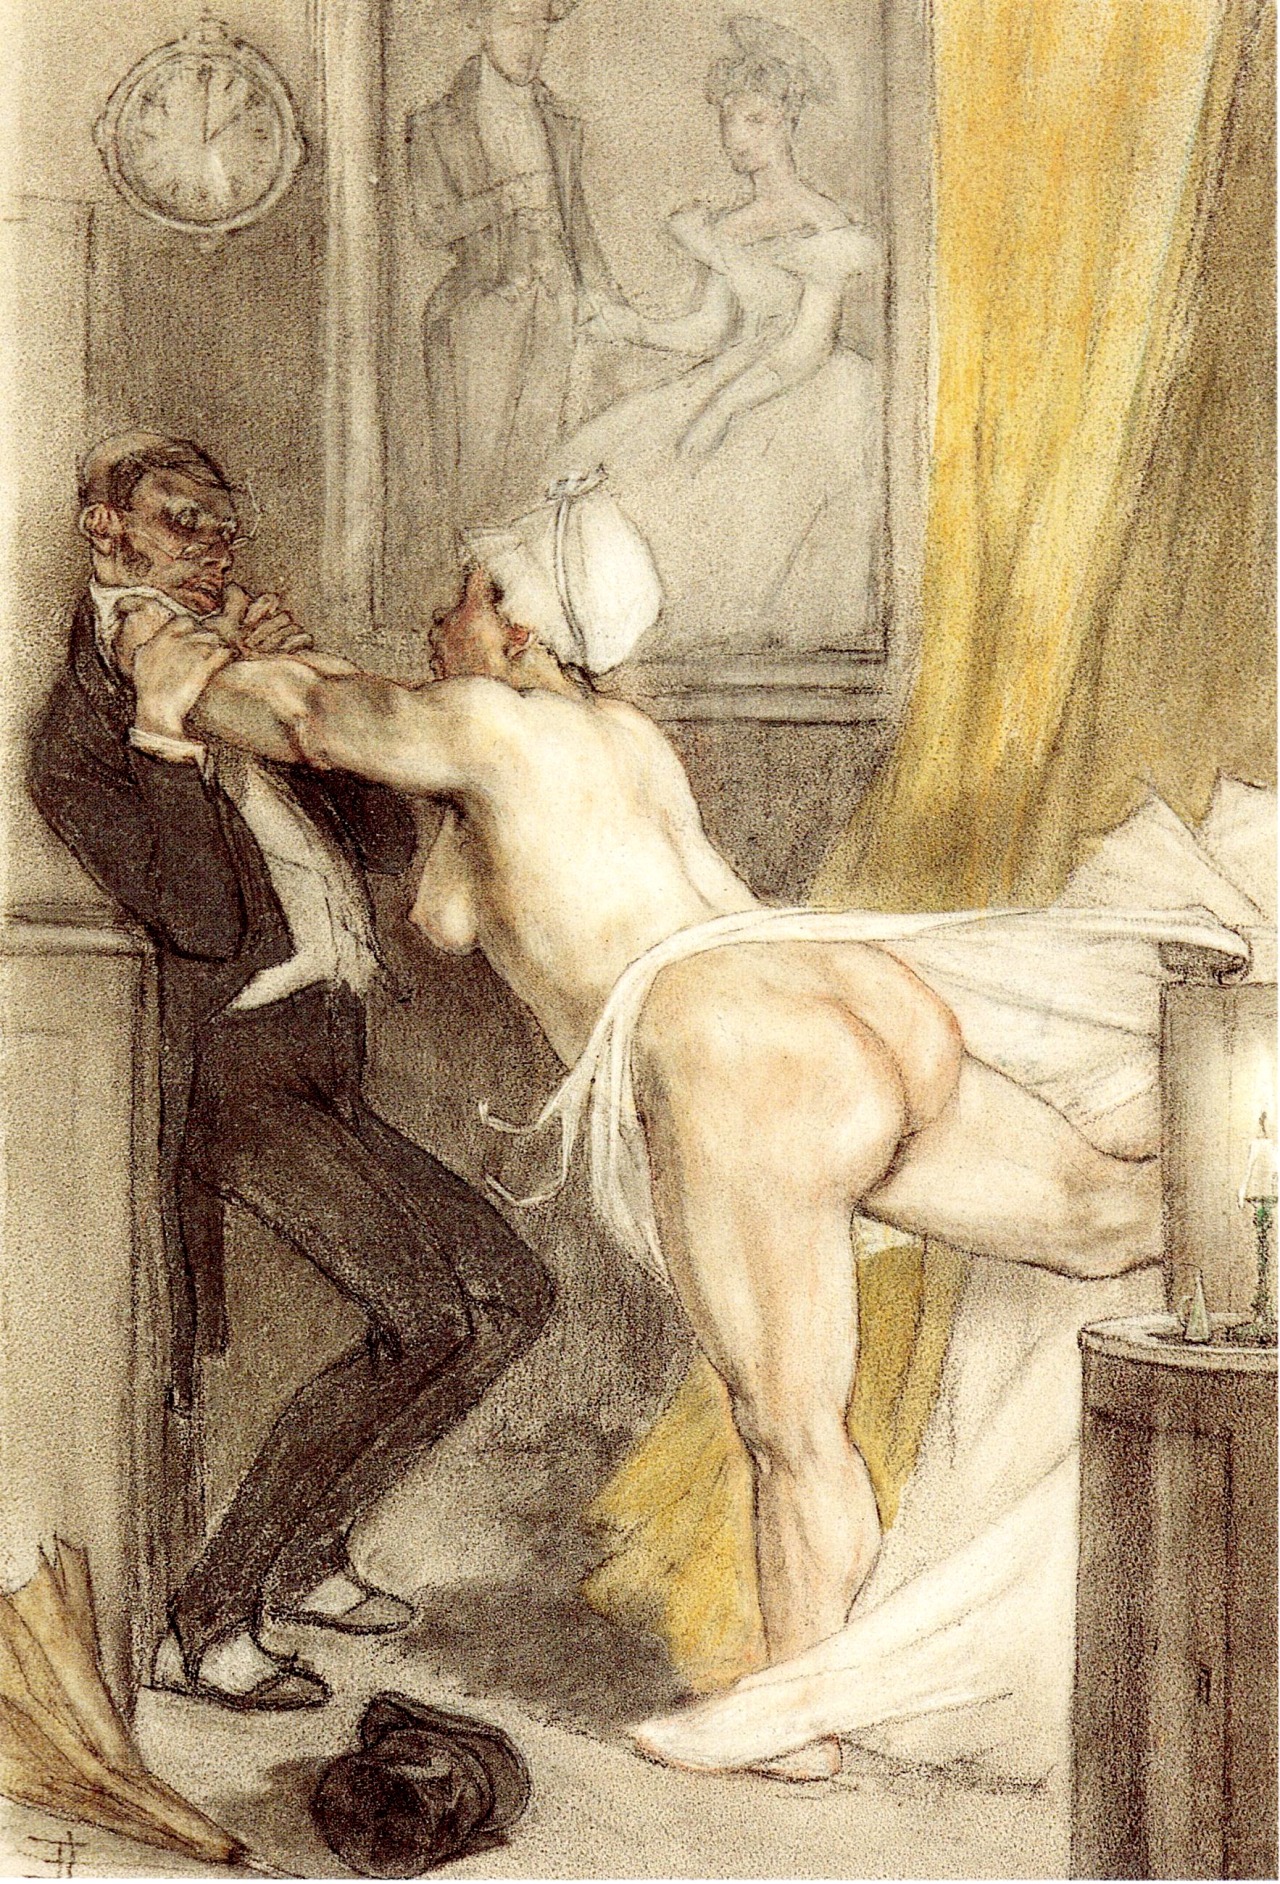 After midnight (The return to love the lack of it). Flicien Rops (1833-1898)